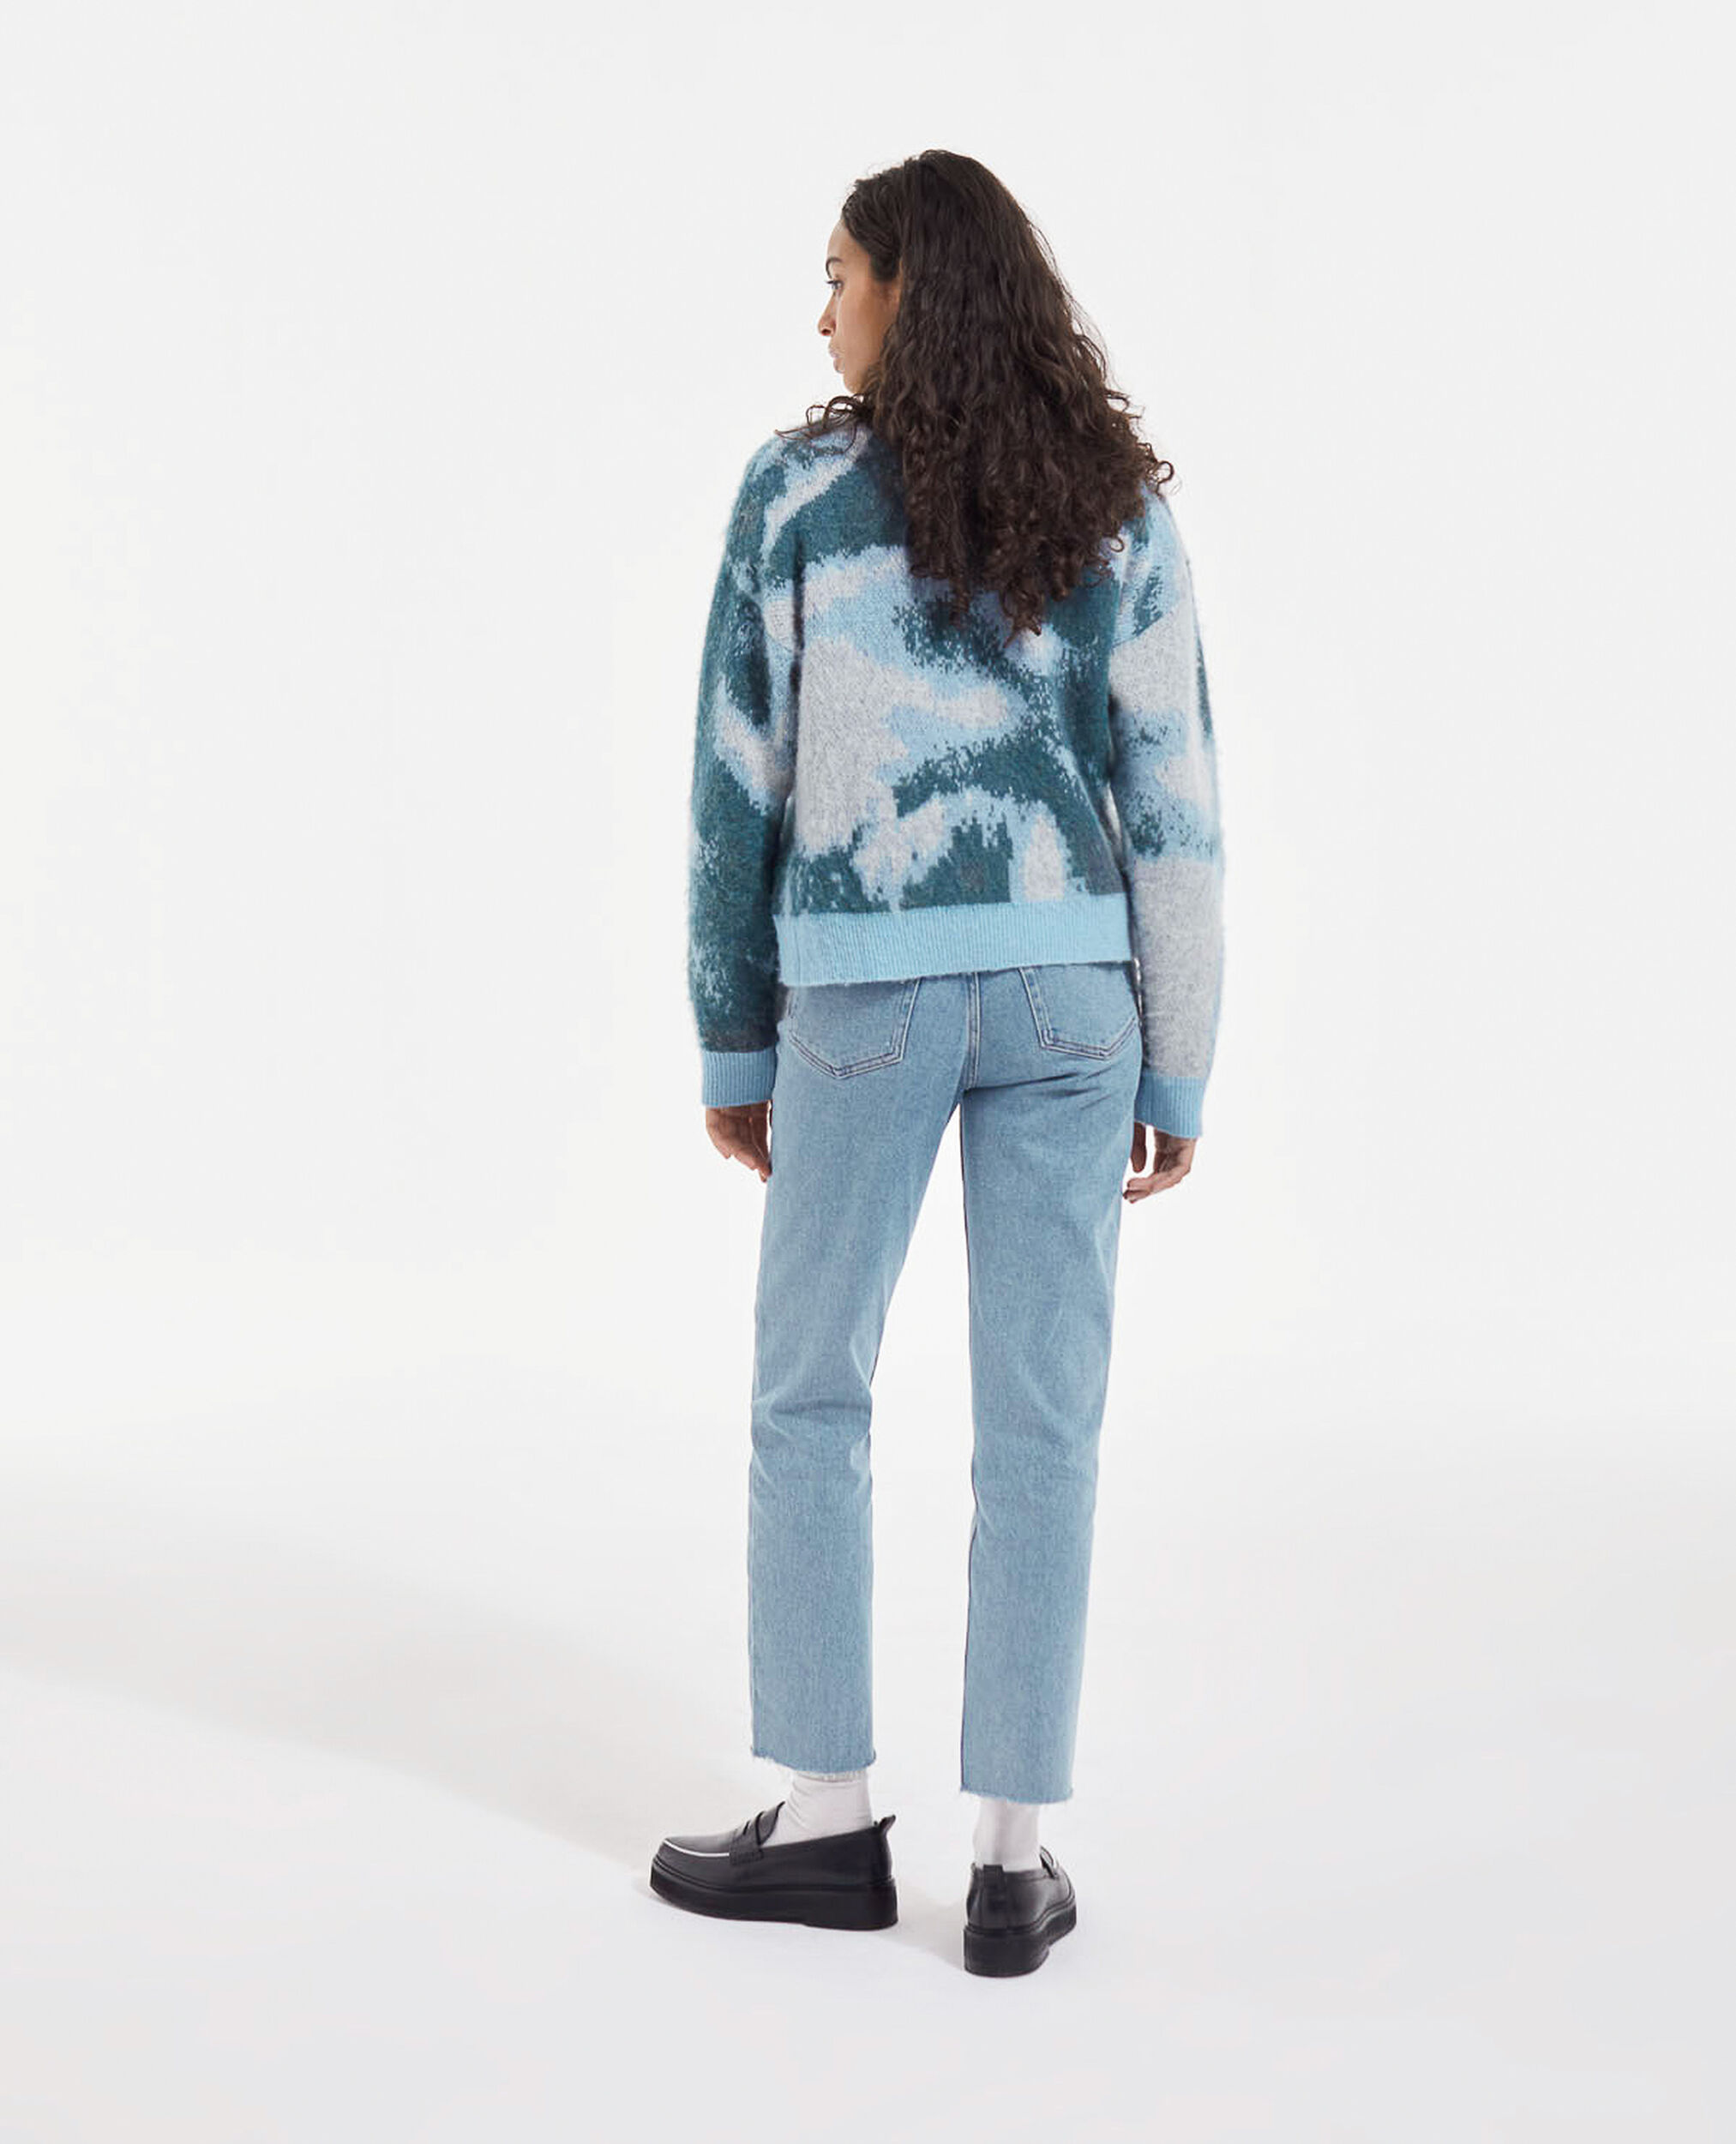 Short wool sweater with blue fade, BLUE, hi-res image number null